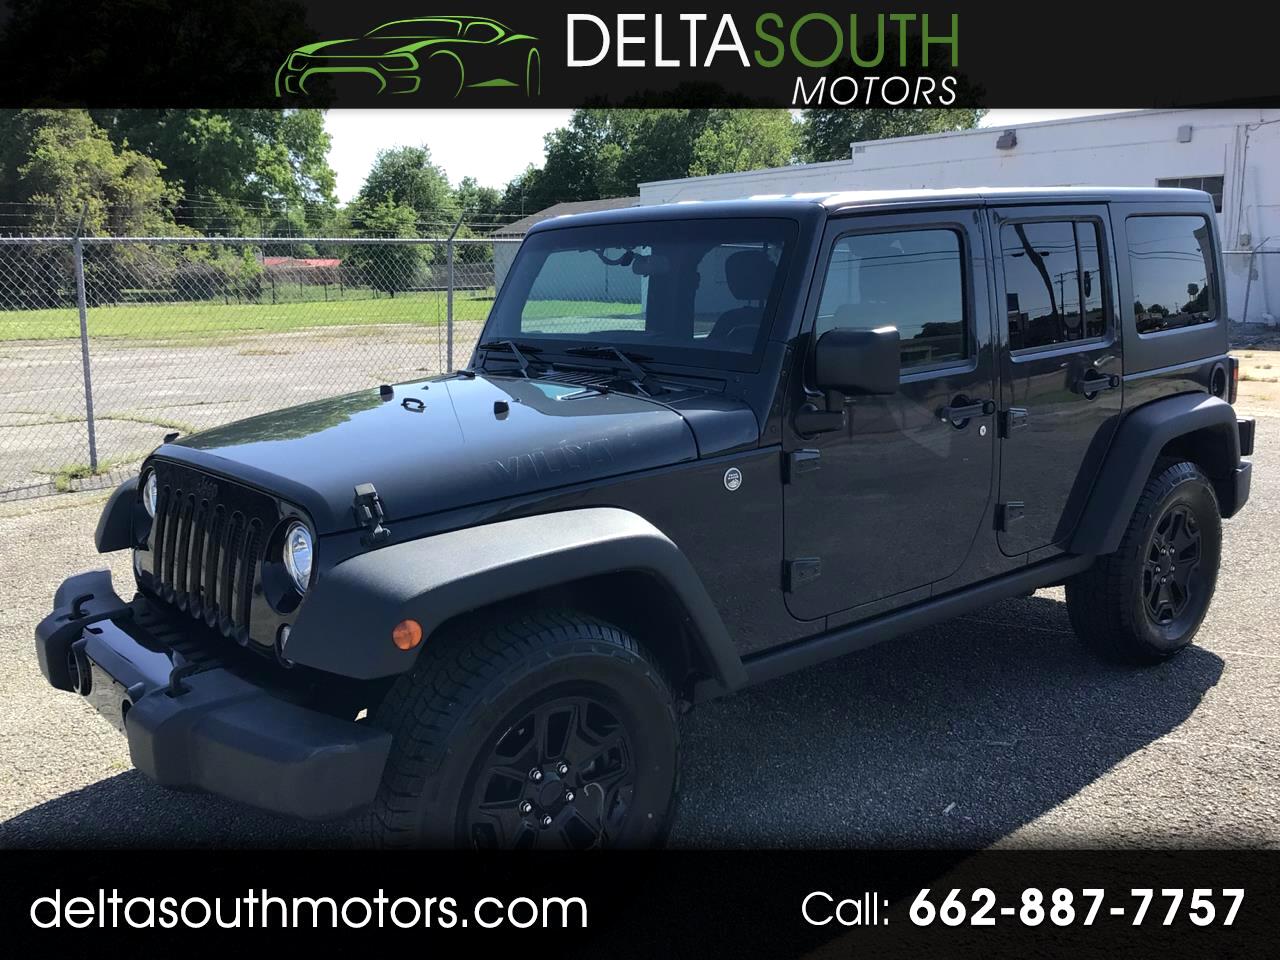 Used 2018 Jeep Wrangler JK Unlimited Willys Wheeler 4x4 for Sale in  Indianola MS 38751 Delta South Motors